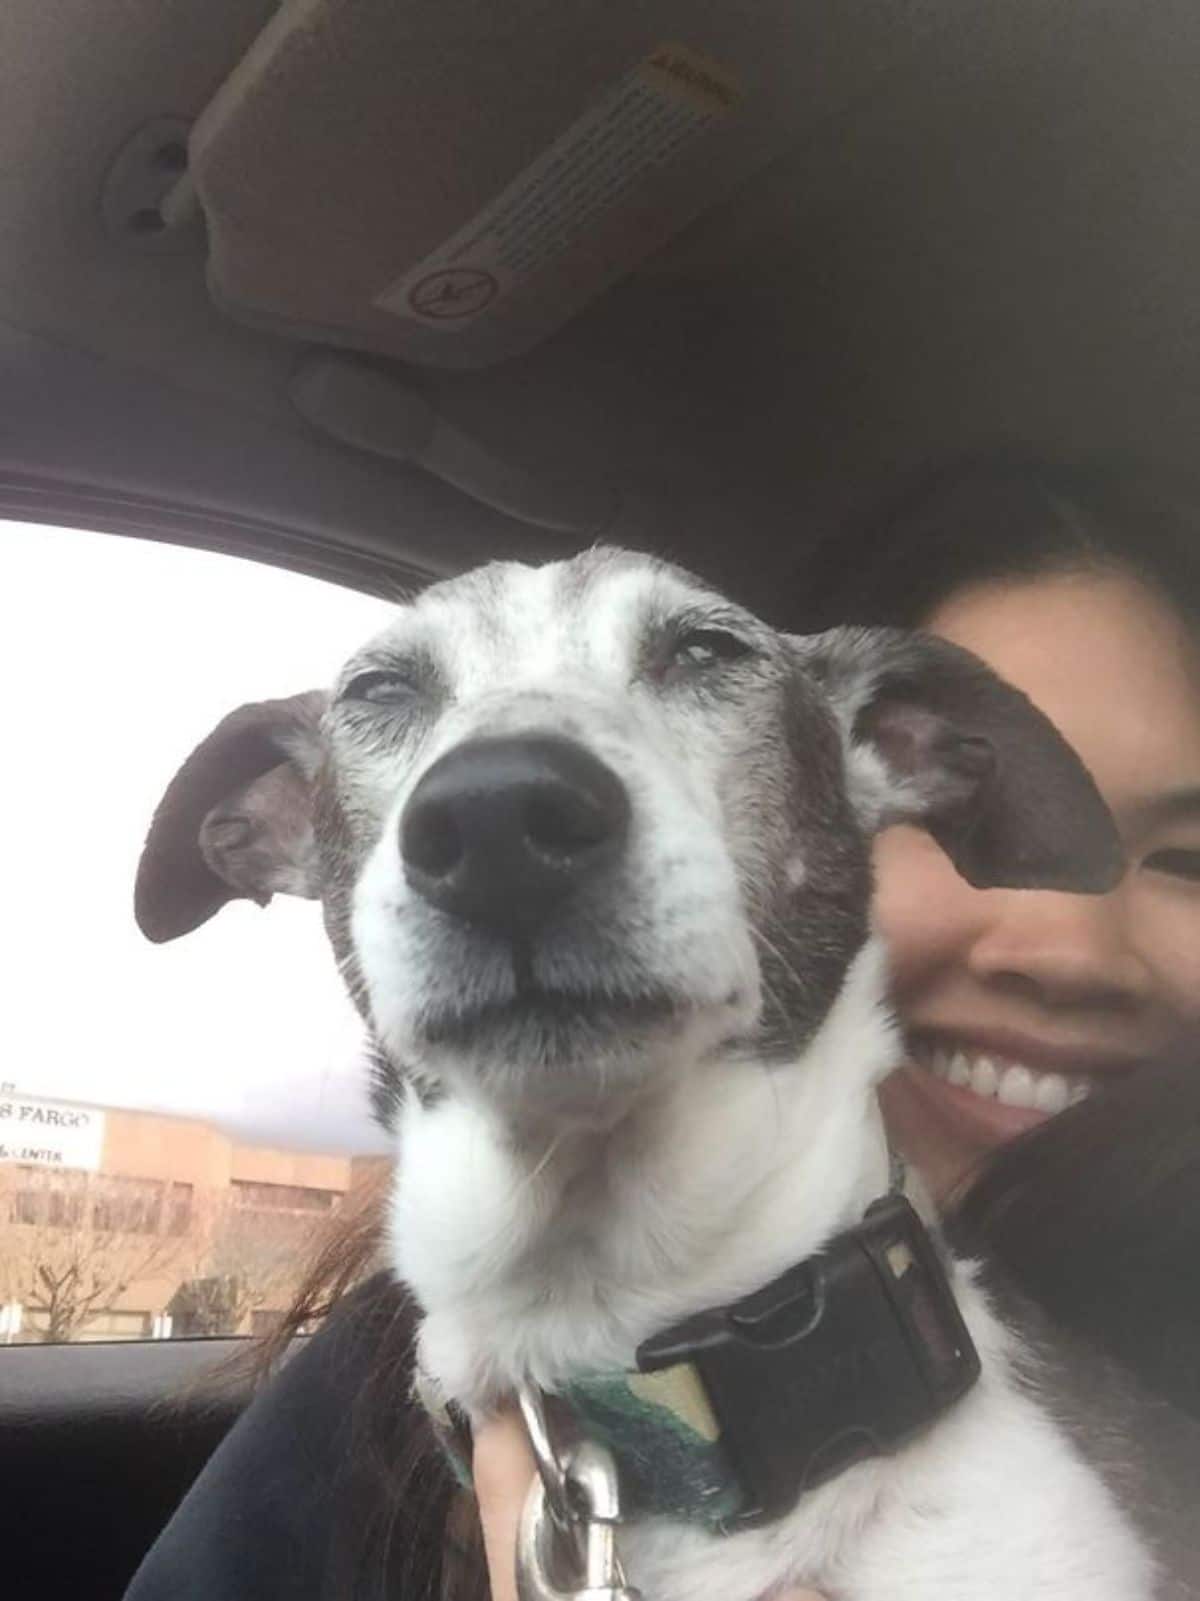 old black and white dog with narrowed eyes being held by someone in a car